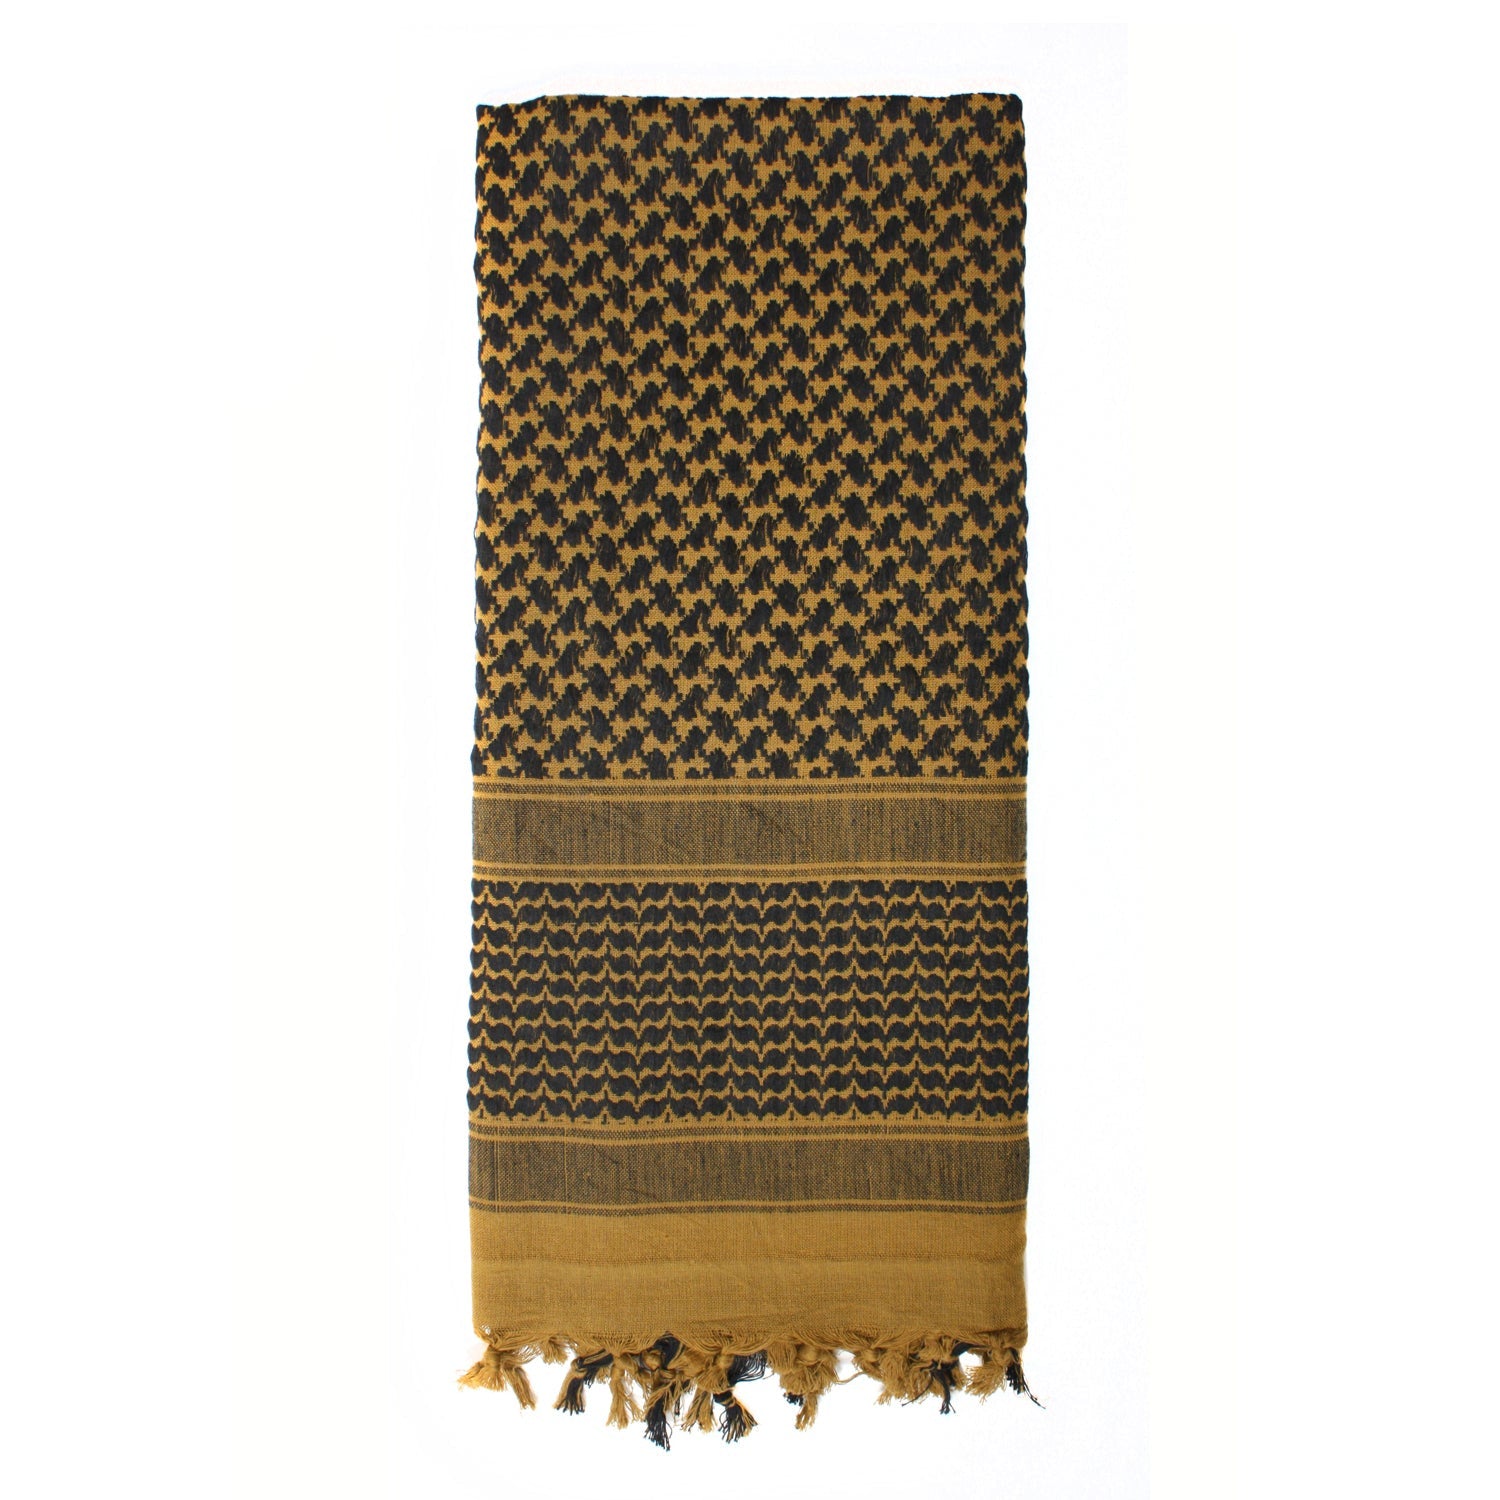 Wear as a face mask, balaclava, or headwrap, Rothco’s Lightweight Desert Shemagh Scarves are adaptable to any environment. Ideally worn while traveling through a desert, snowstorm, and any other extreme weather condition you may encounter, these tactical scarves are a must-have for anyone! 